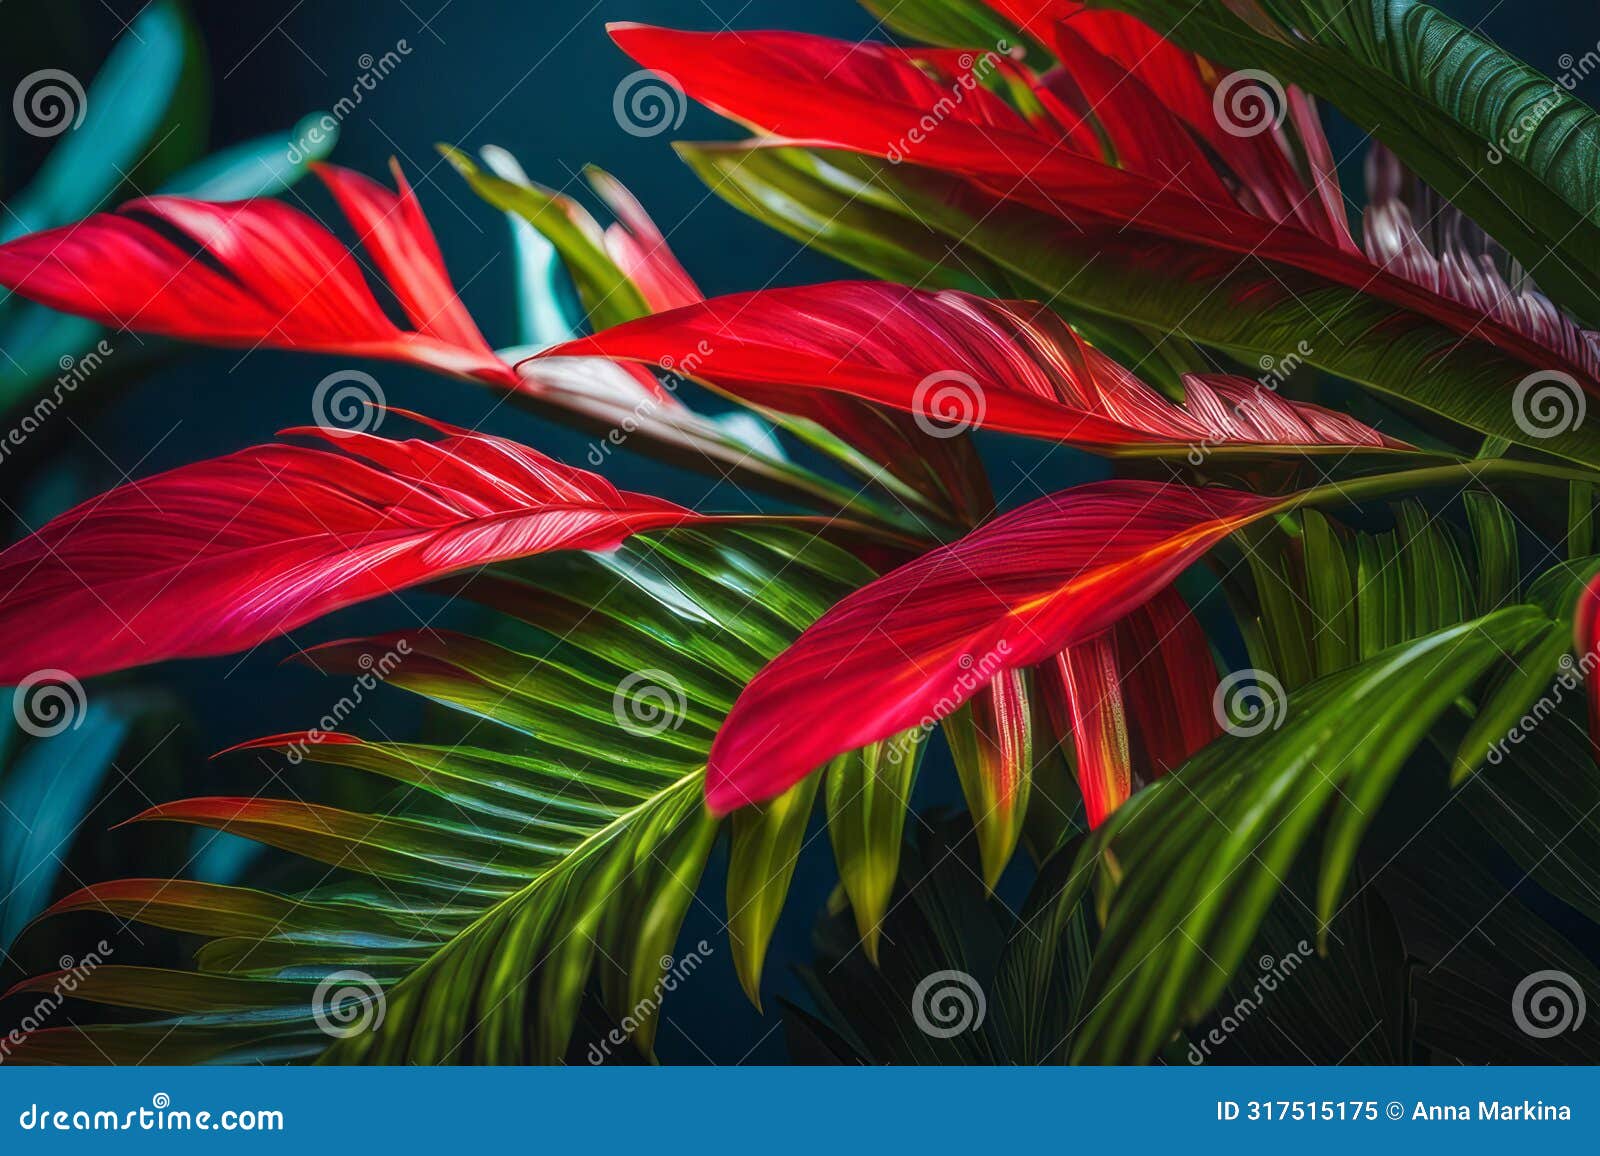 tropical wilderness showcased through a kaleidoscope of vibrant leaves.